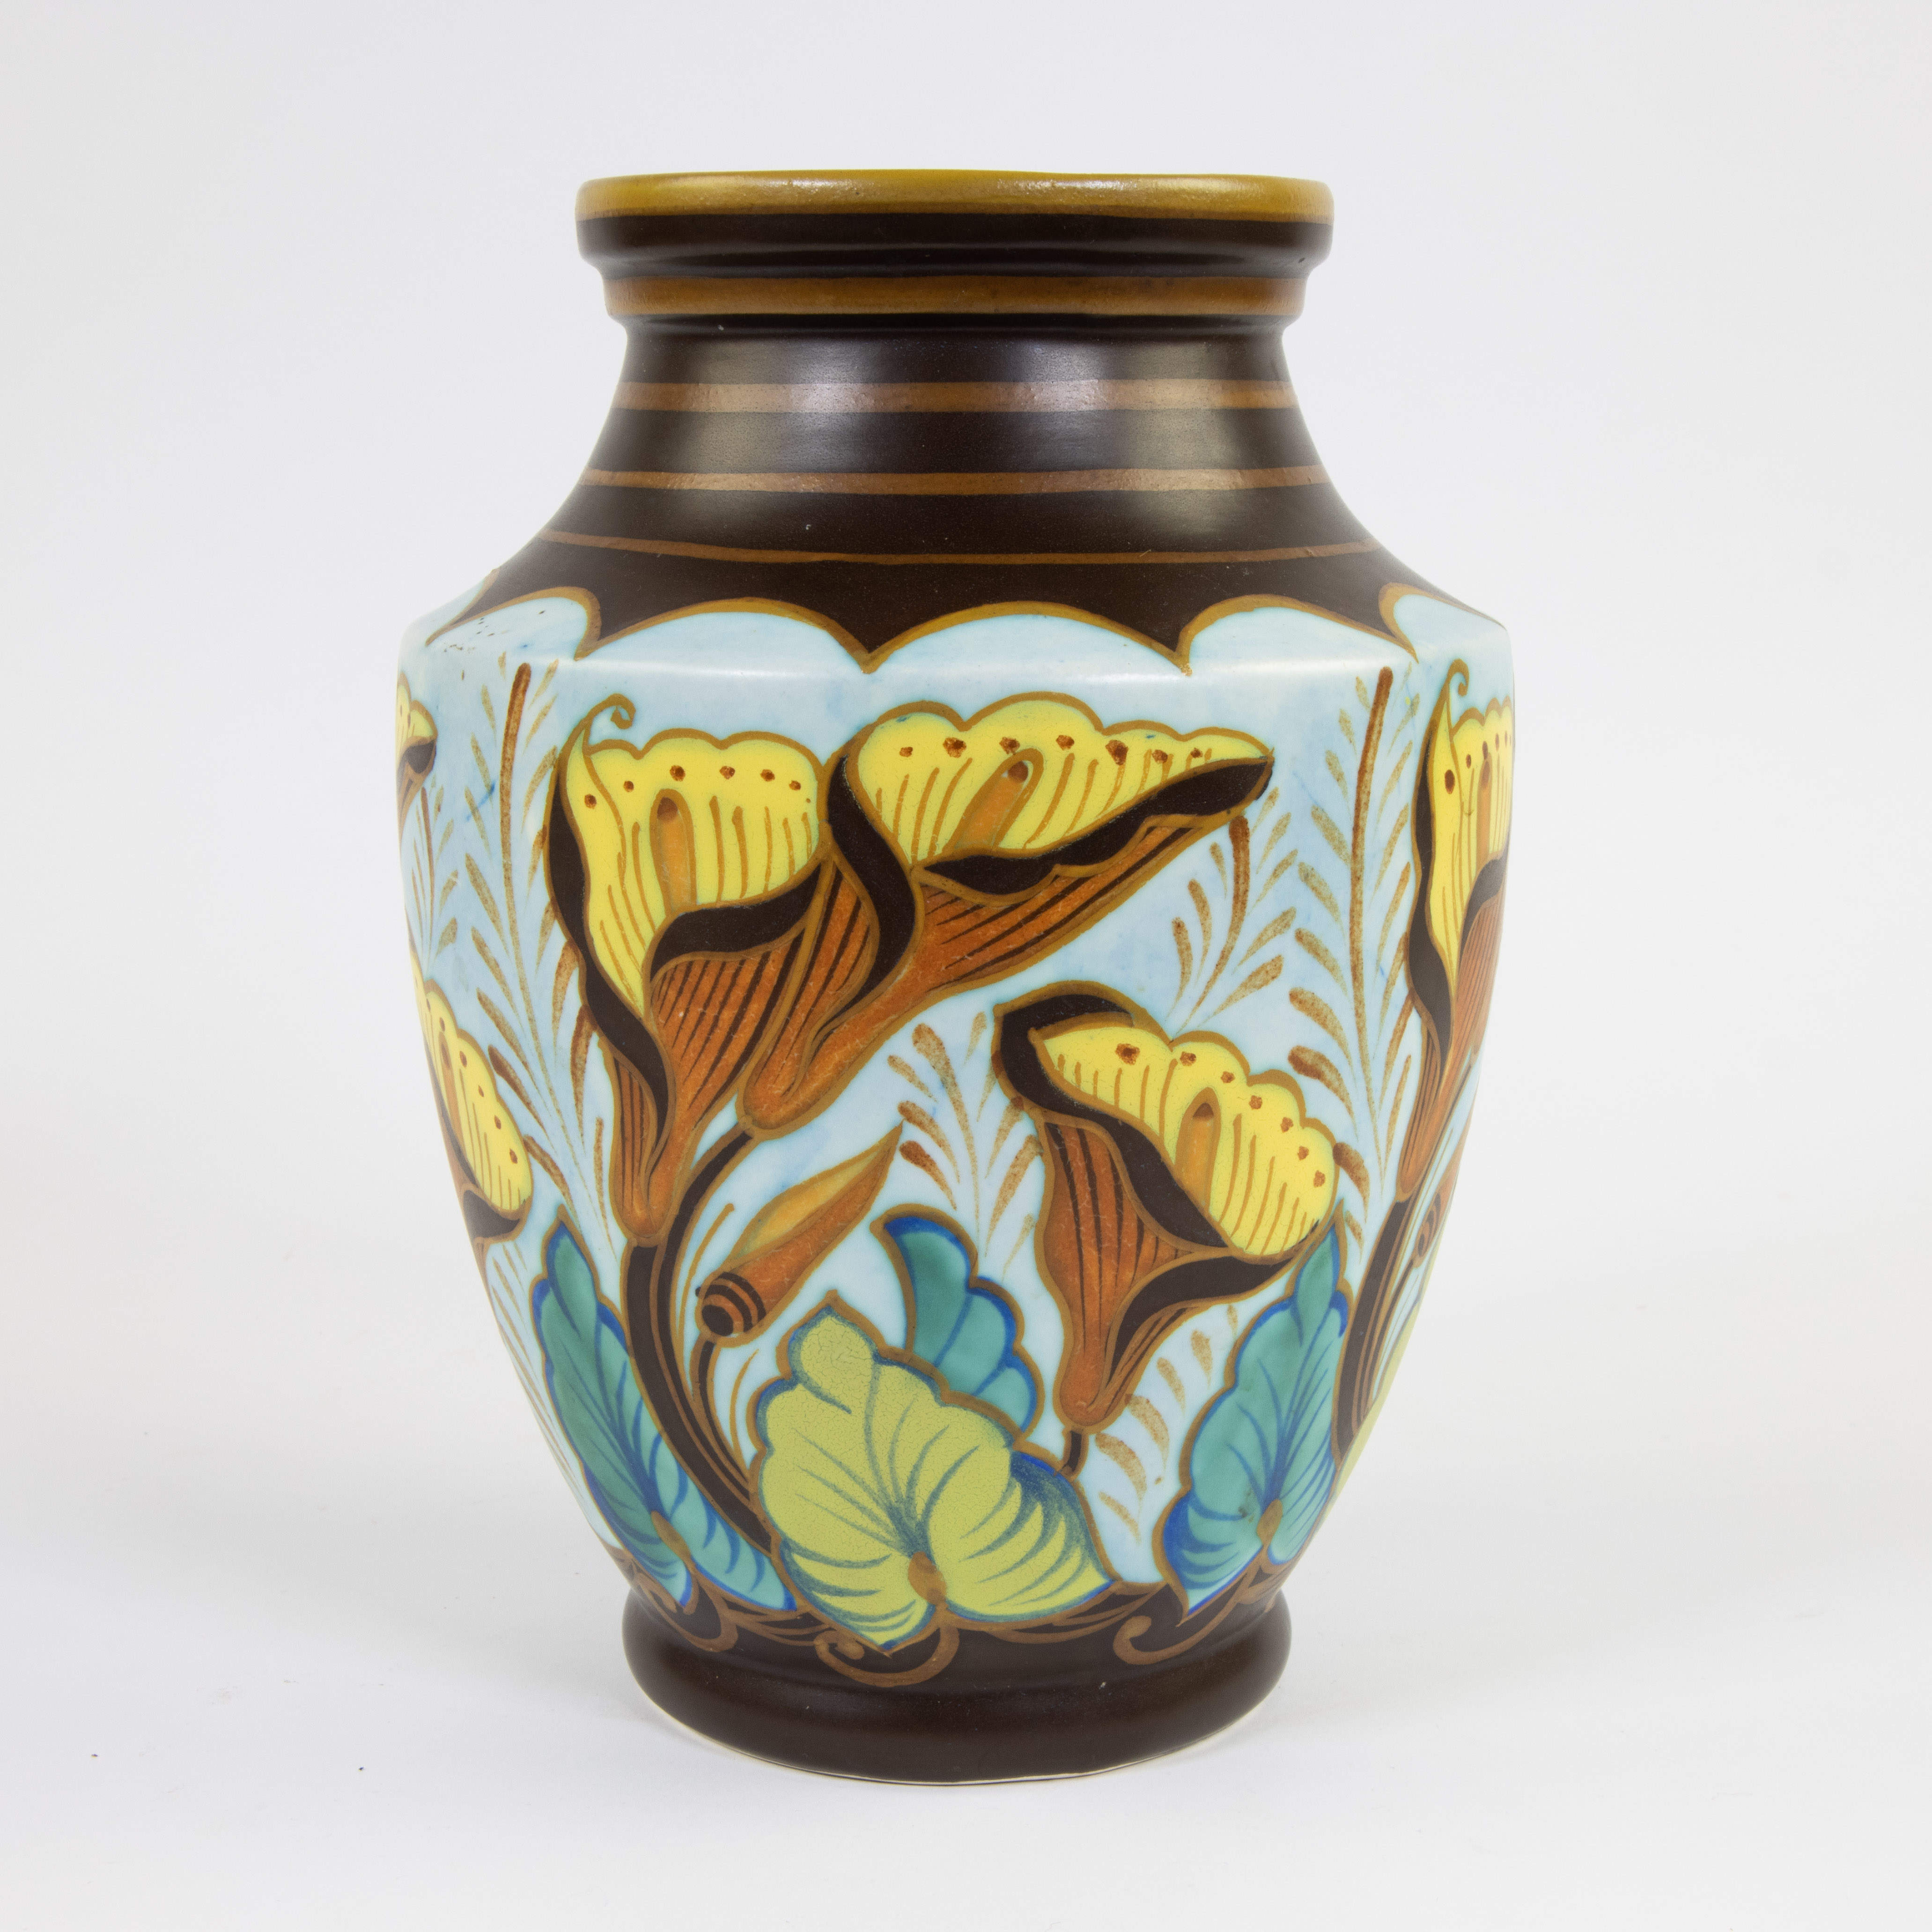 Boch Keramis Art deco vase with decoration of flowers of arums, model D.2064, polychrome glazed eart - Image 2 of 6